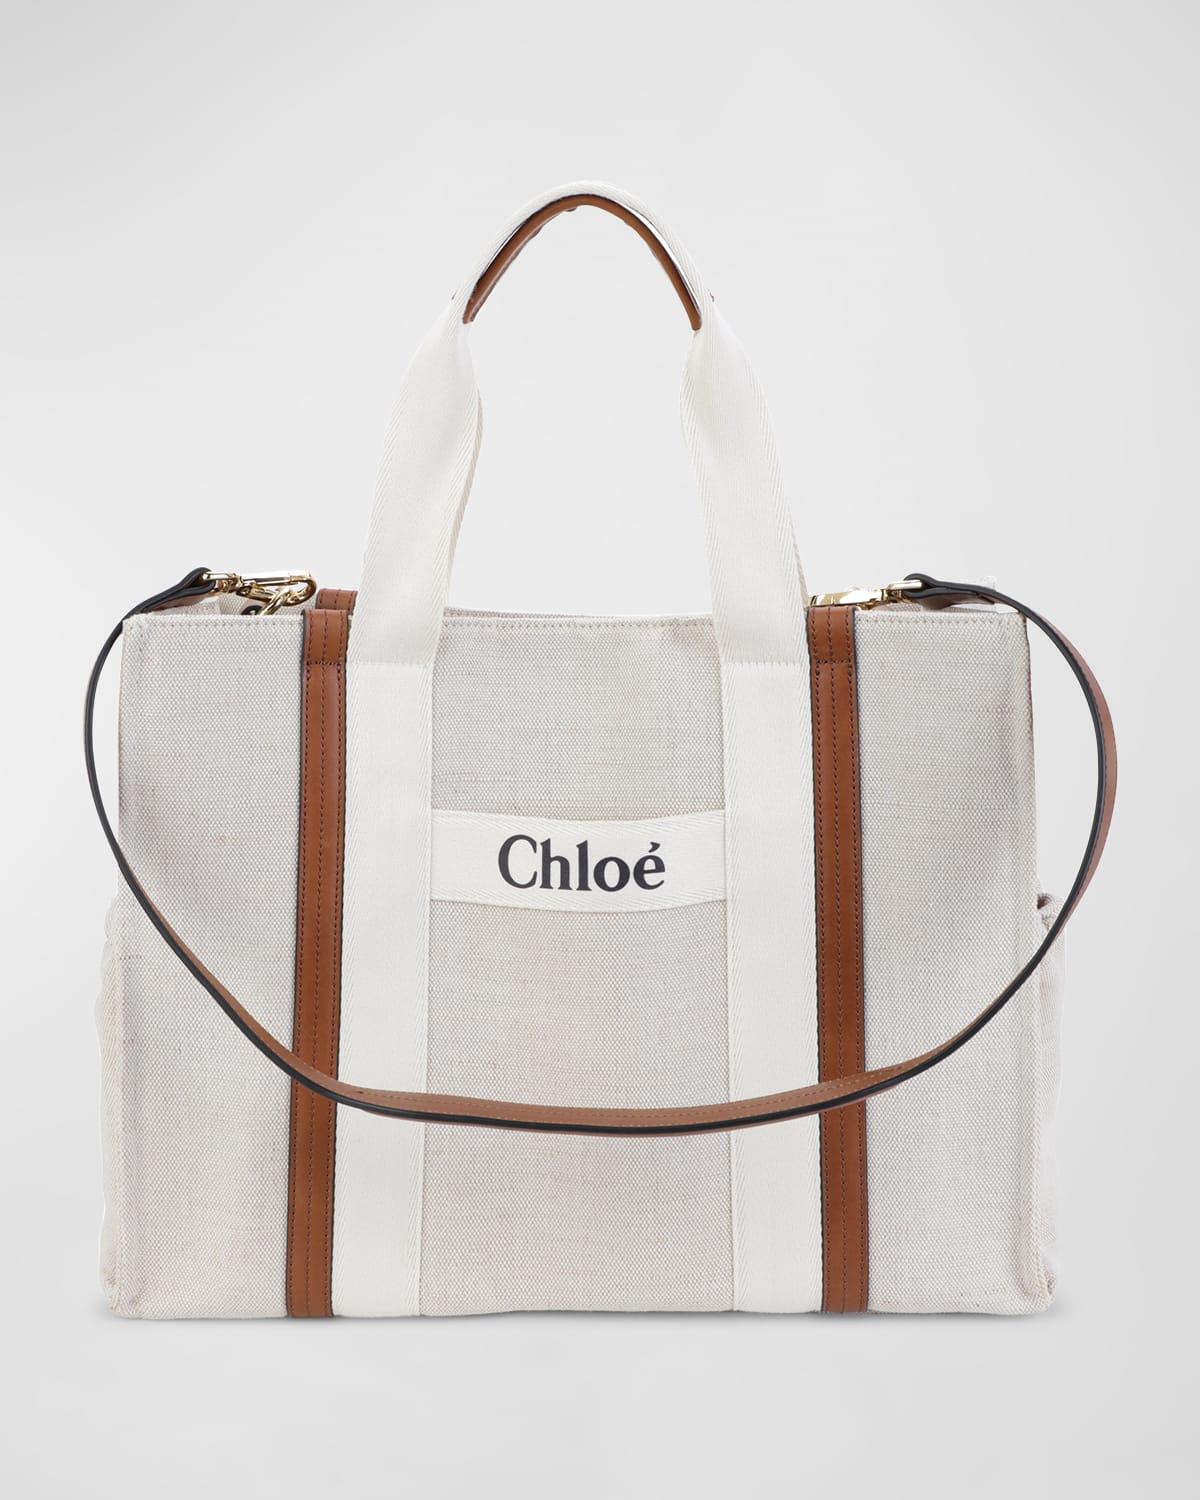 Chloé Logo Canvas Leather Changing Bag in White | Lyst